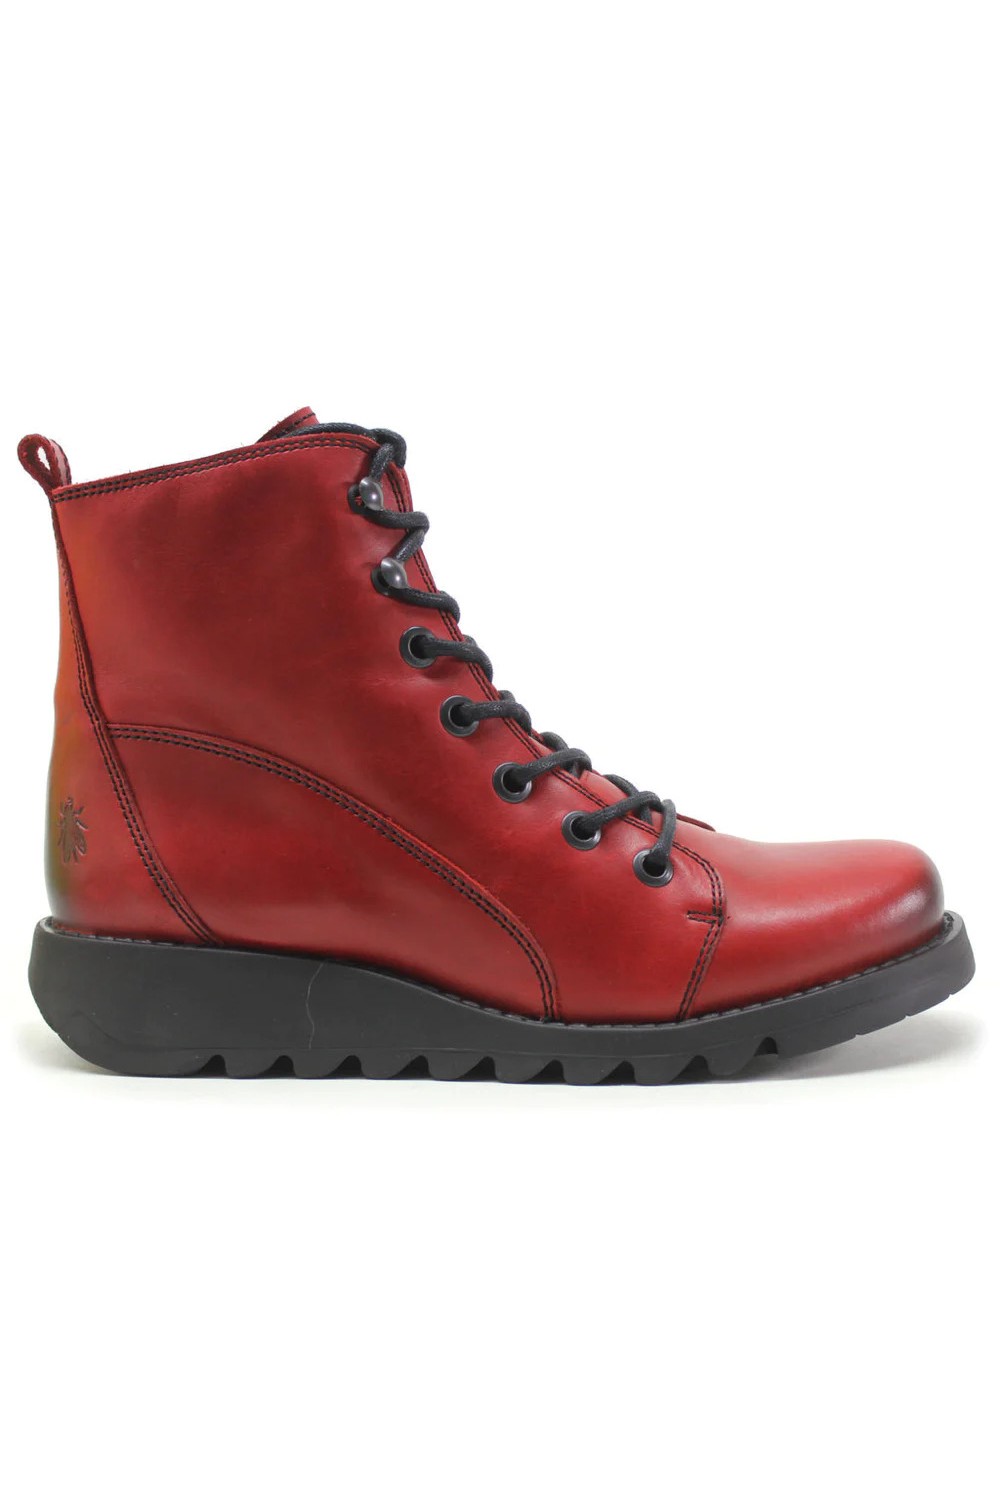 FLY LONDON Sore813 Lace Up Boots Red (Black Soles).